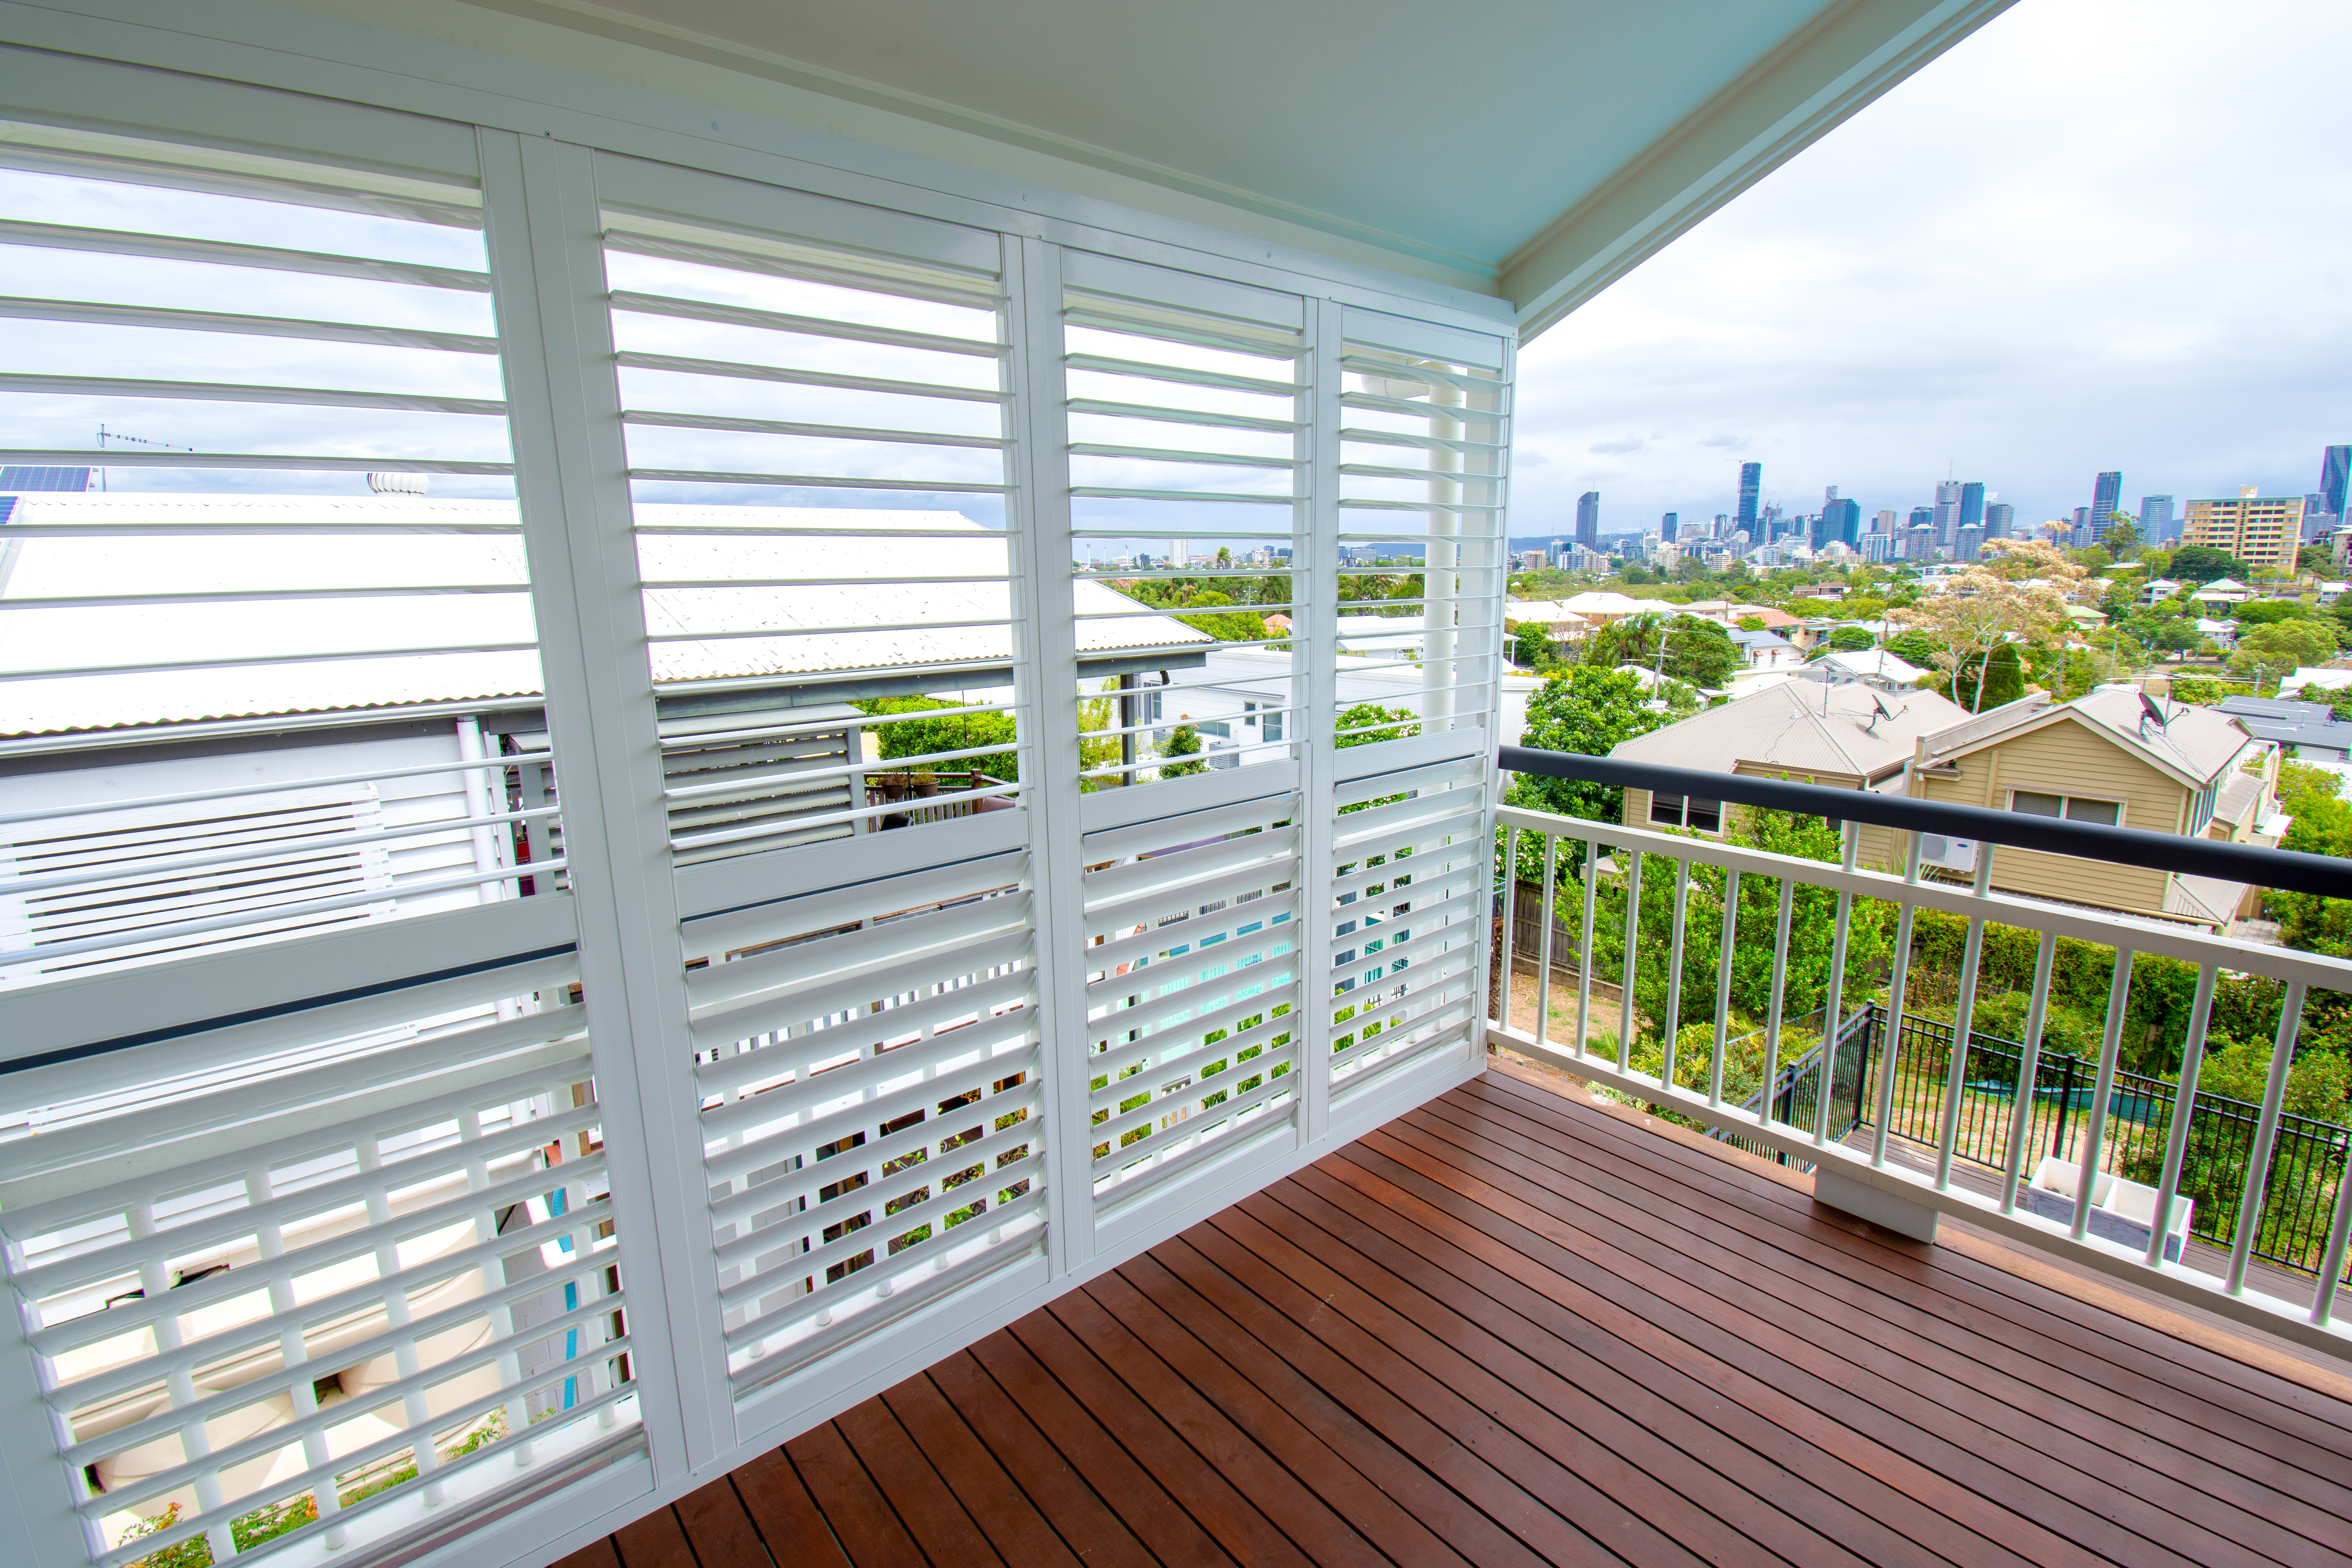 Outdoor area with Aluminium Shutters siding with the Brisbane Skyline in the background.